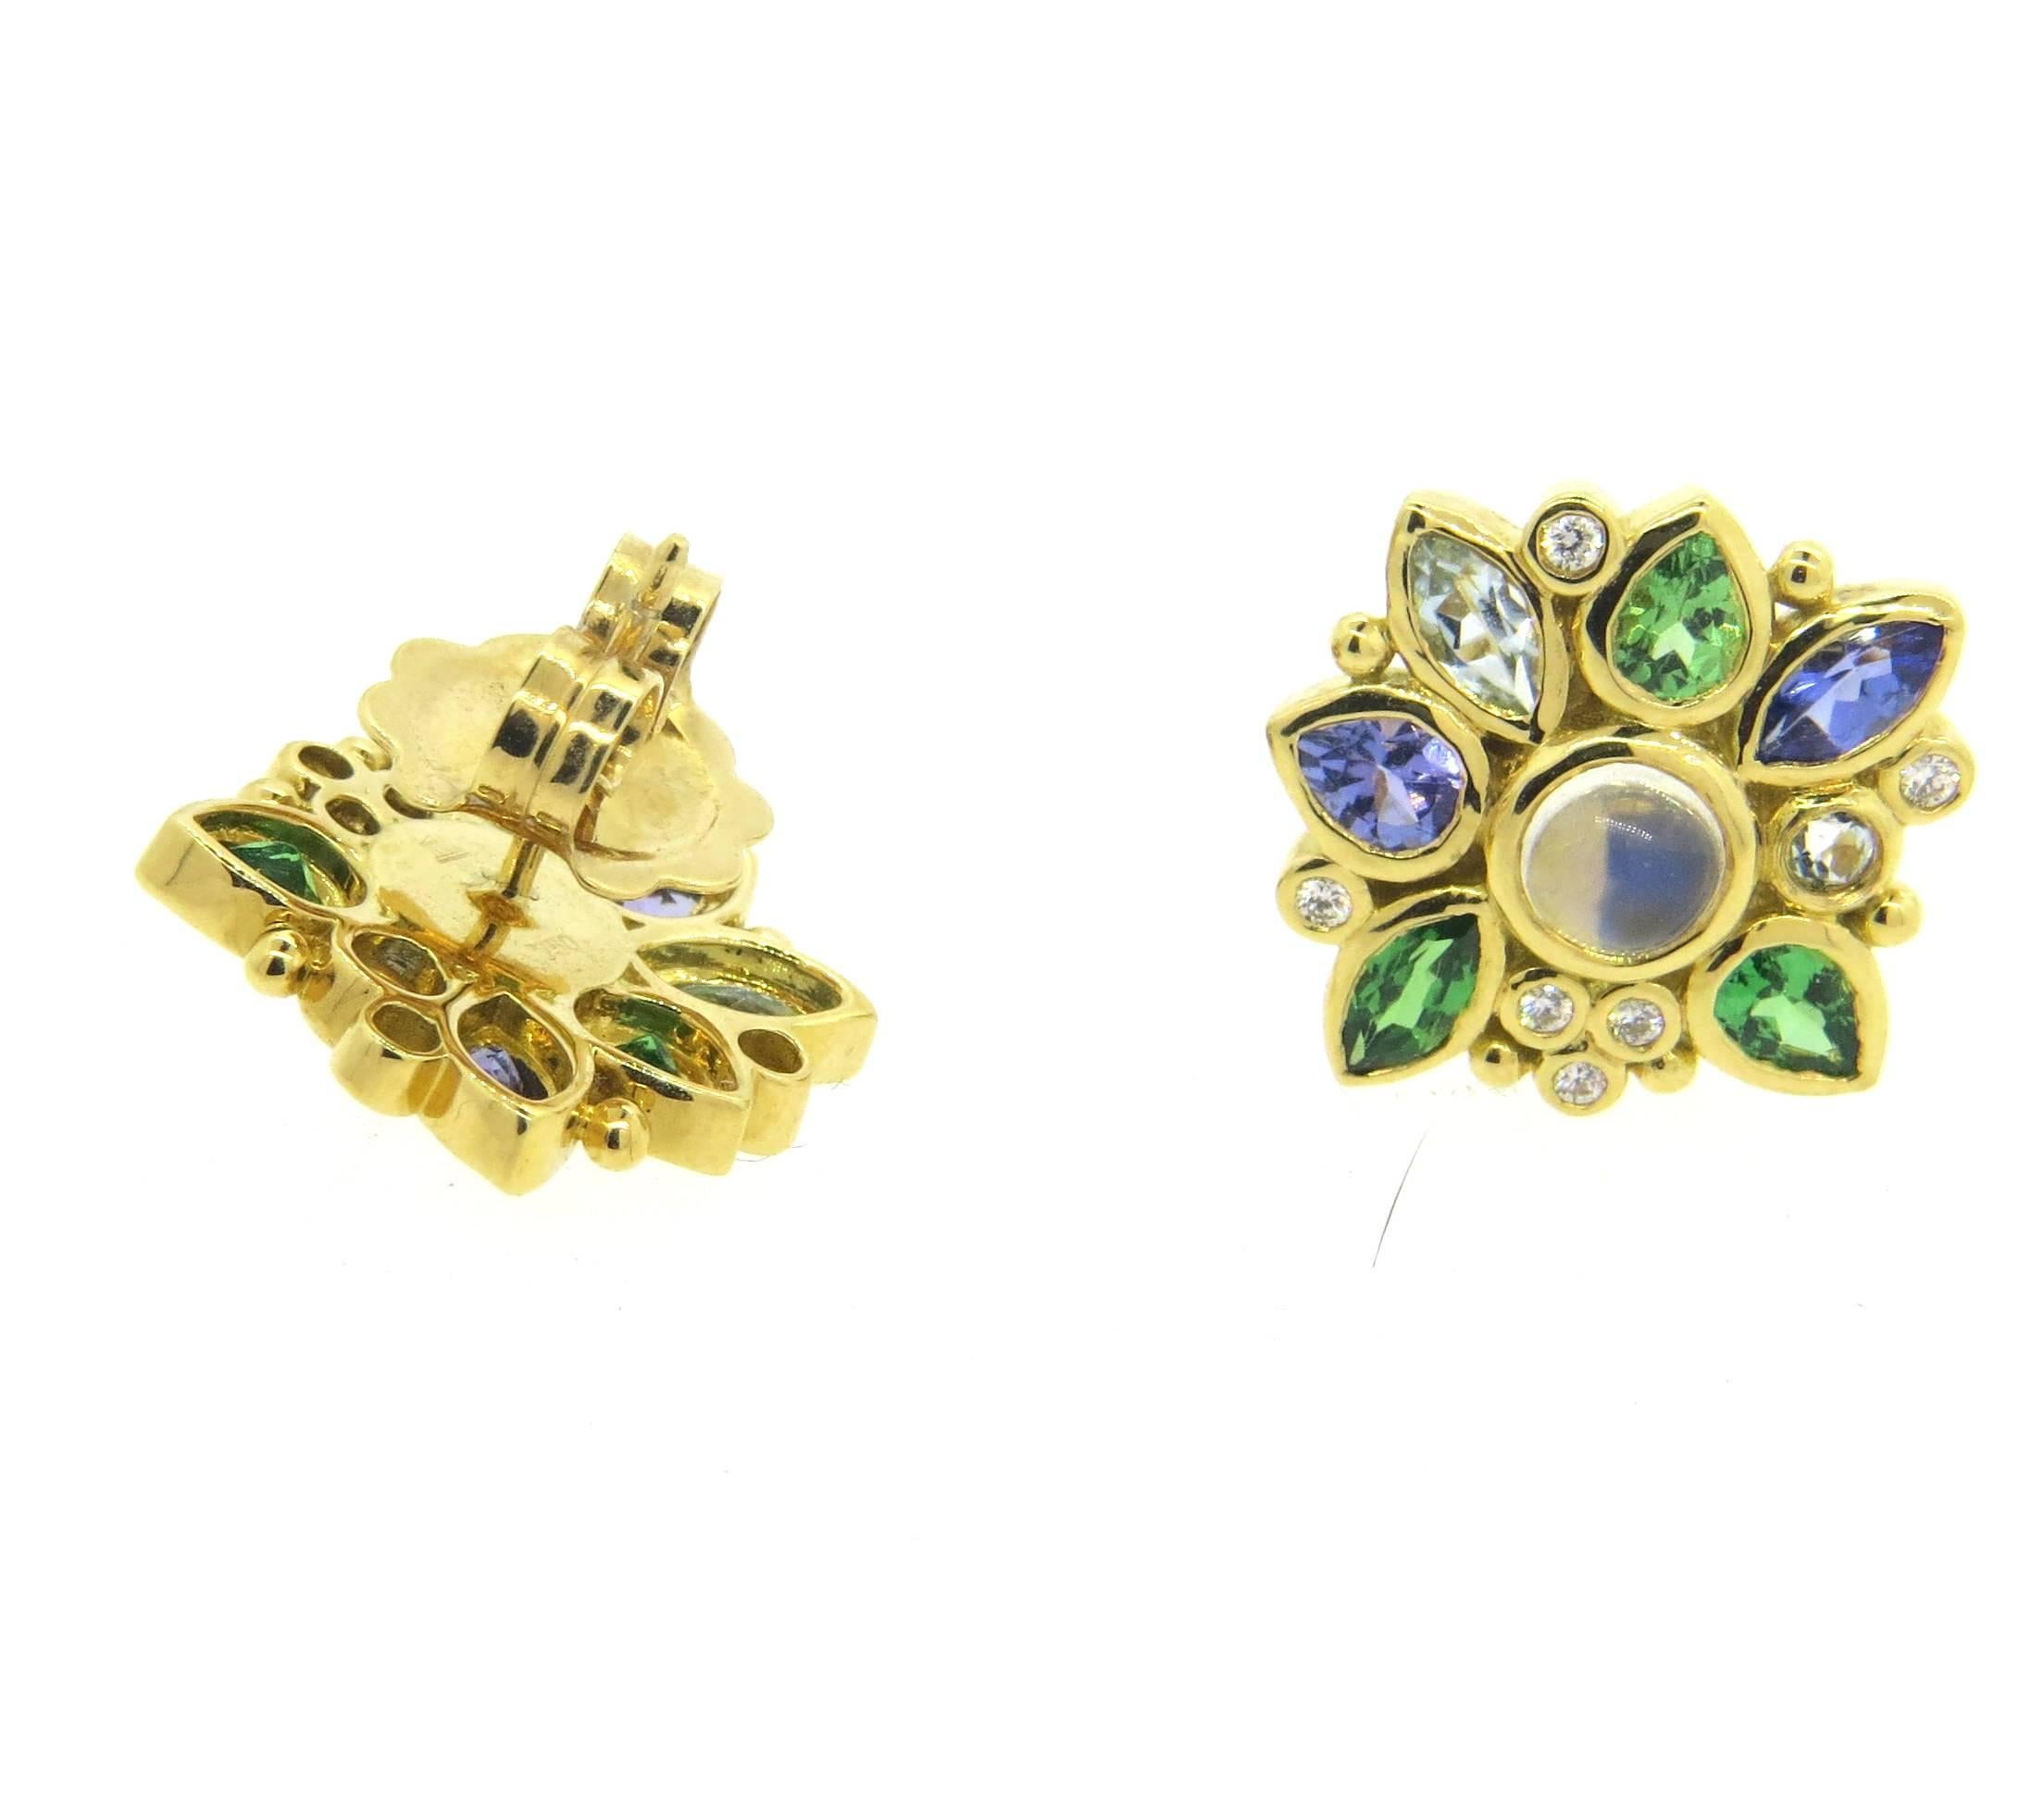 Pair of new 18k yellow gold earrings, crafted by Temple St. Clair for Anima collection, decorated with 0.13ctw in G/VS diamonds, moonstone, tsavorite garnets and tanzanites. Earrings measure 20mm x 19mm. Marked 750 and with Temple hallmark. Weight -